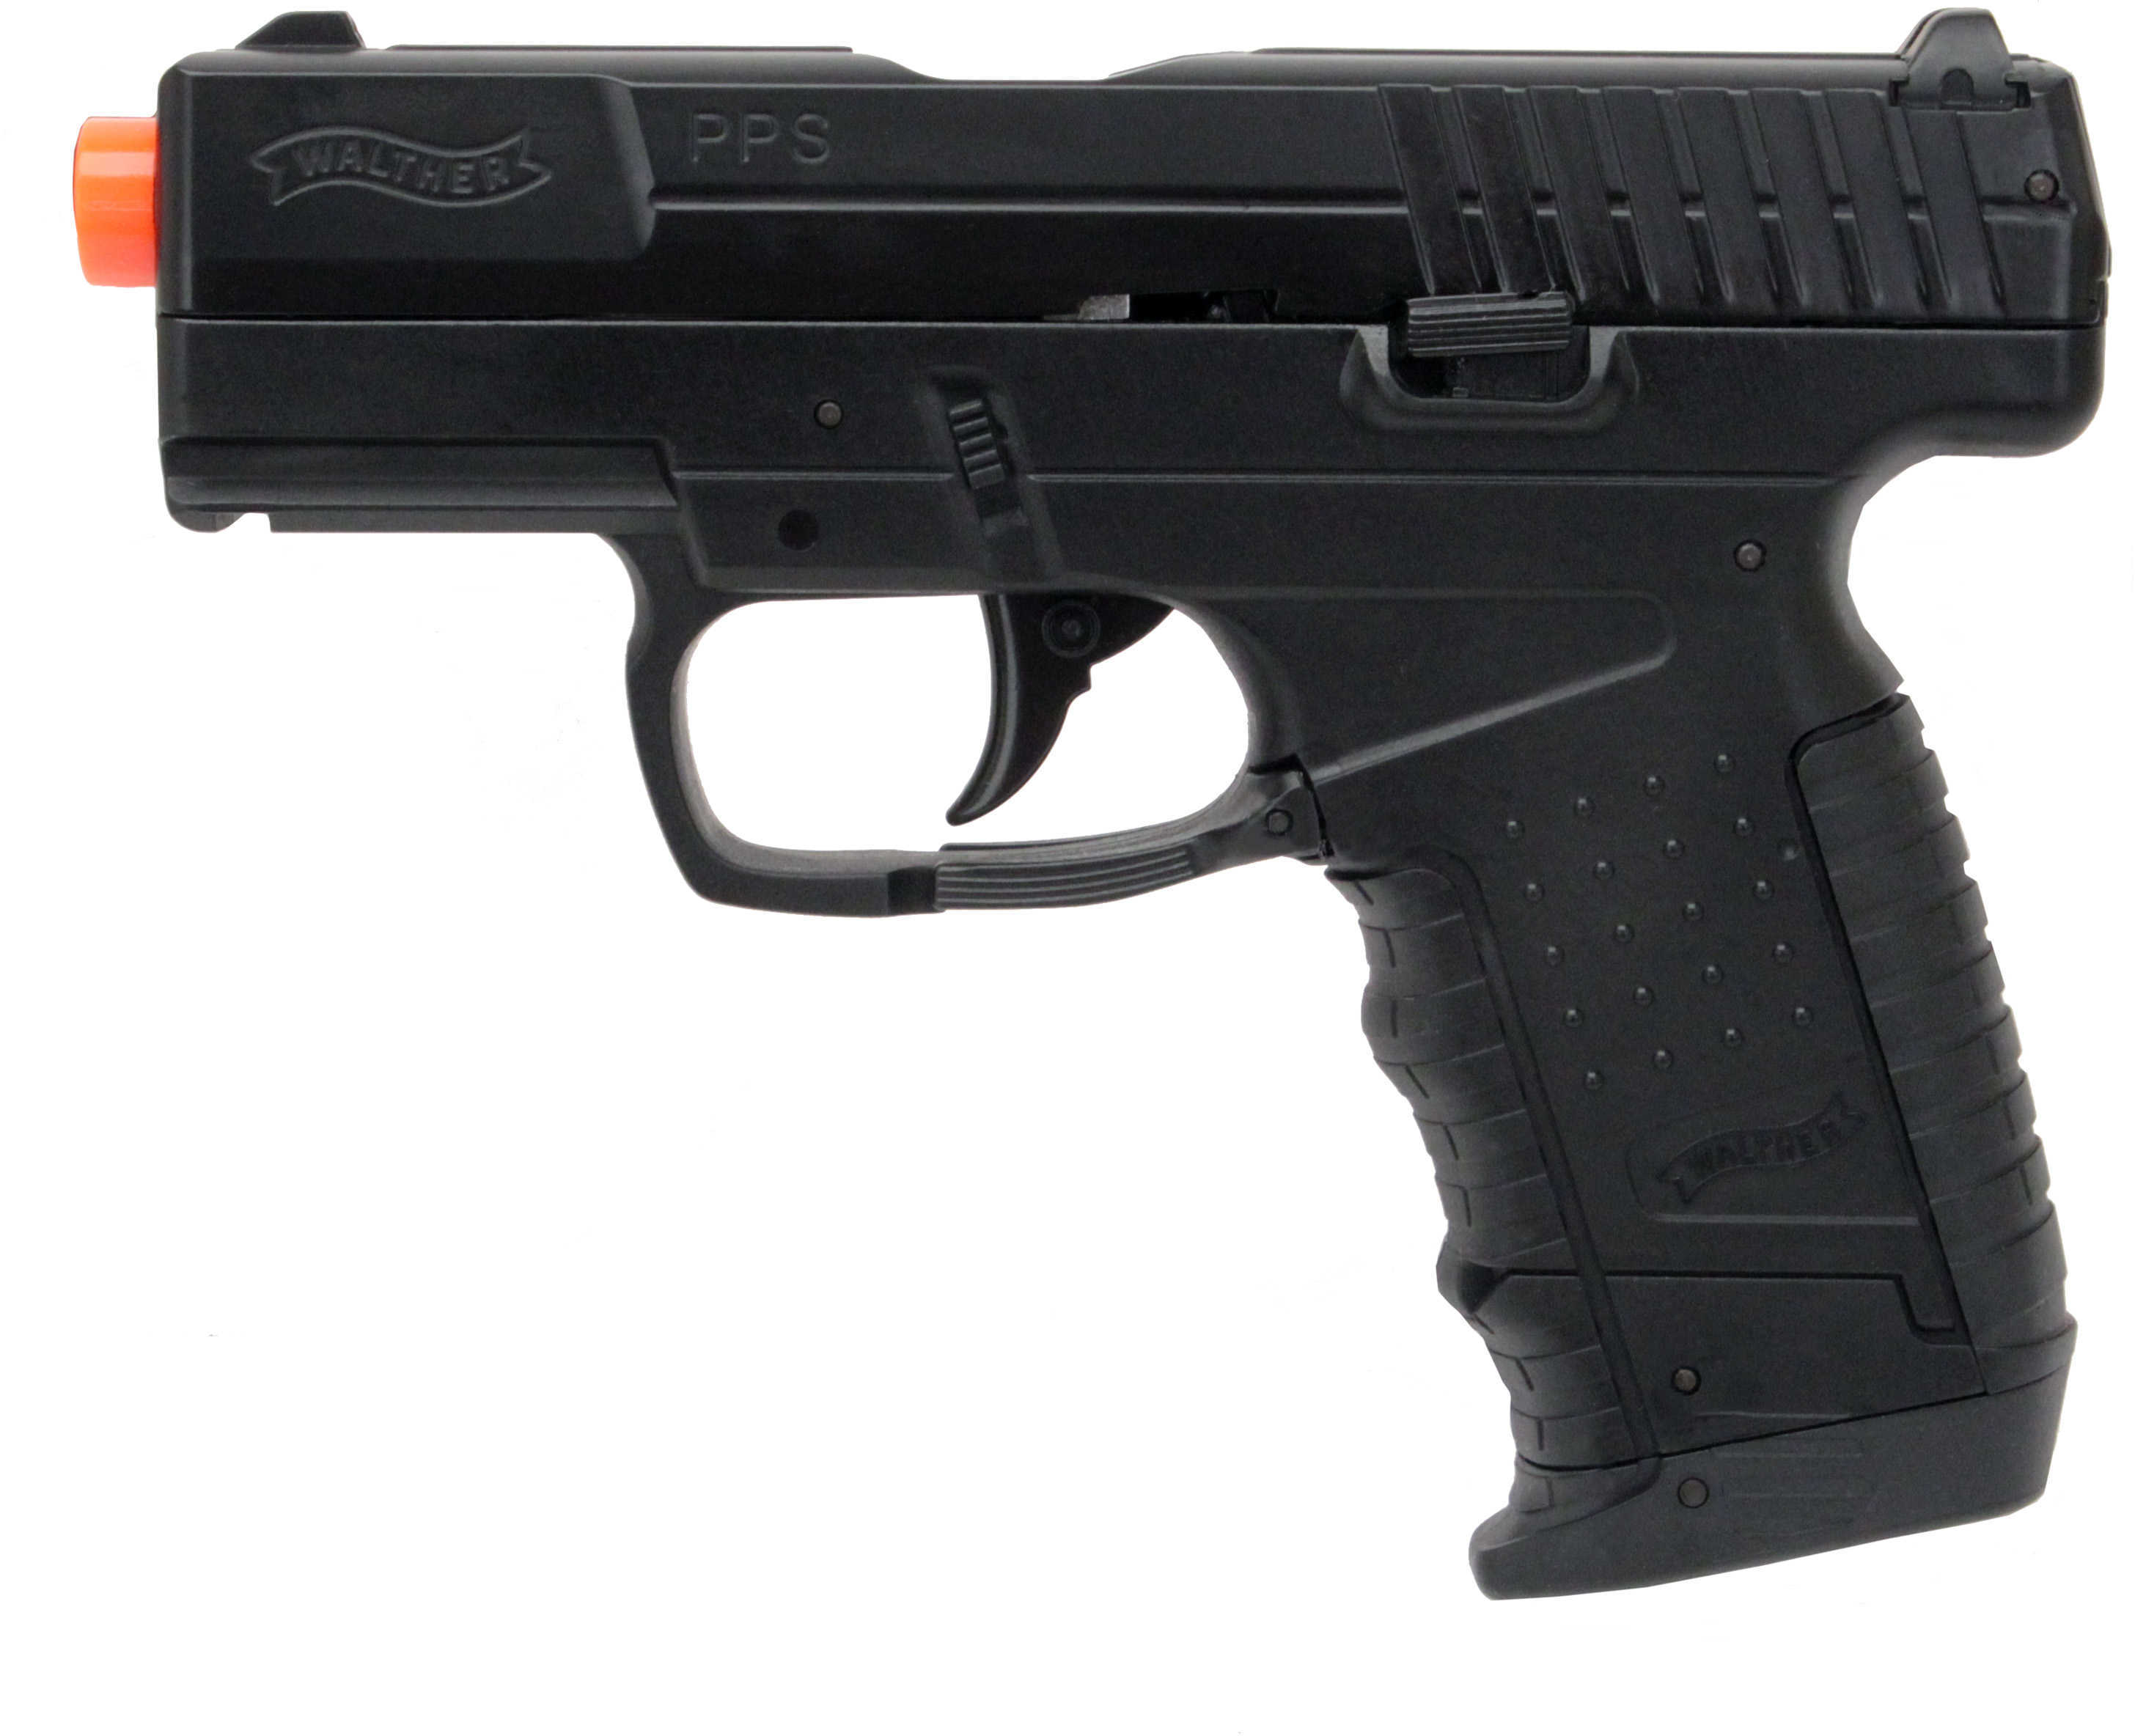 Umarex USA Walther CO2 Airsoft Pistol PPS Black Md ...